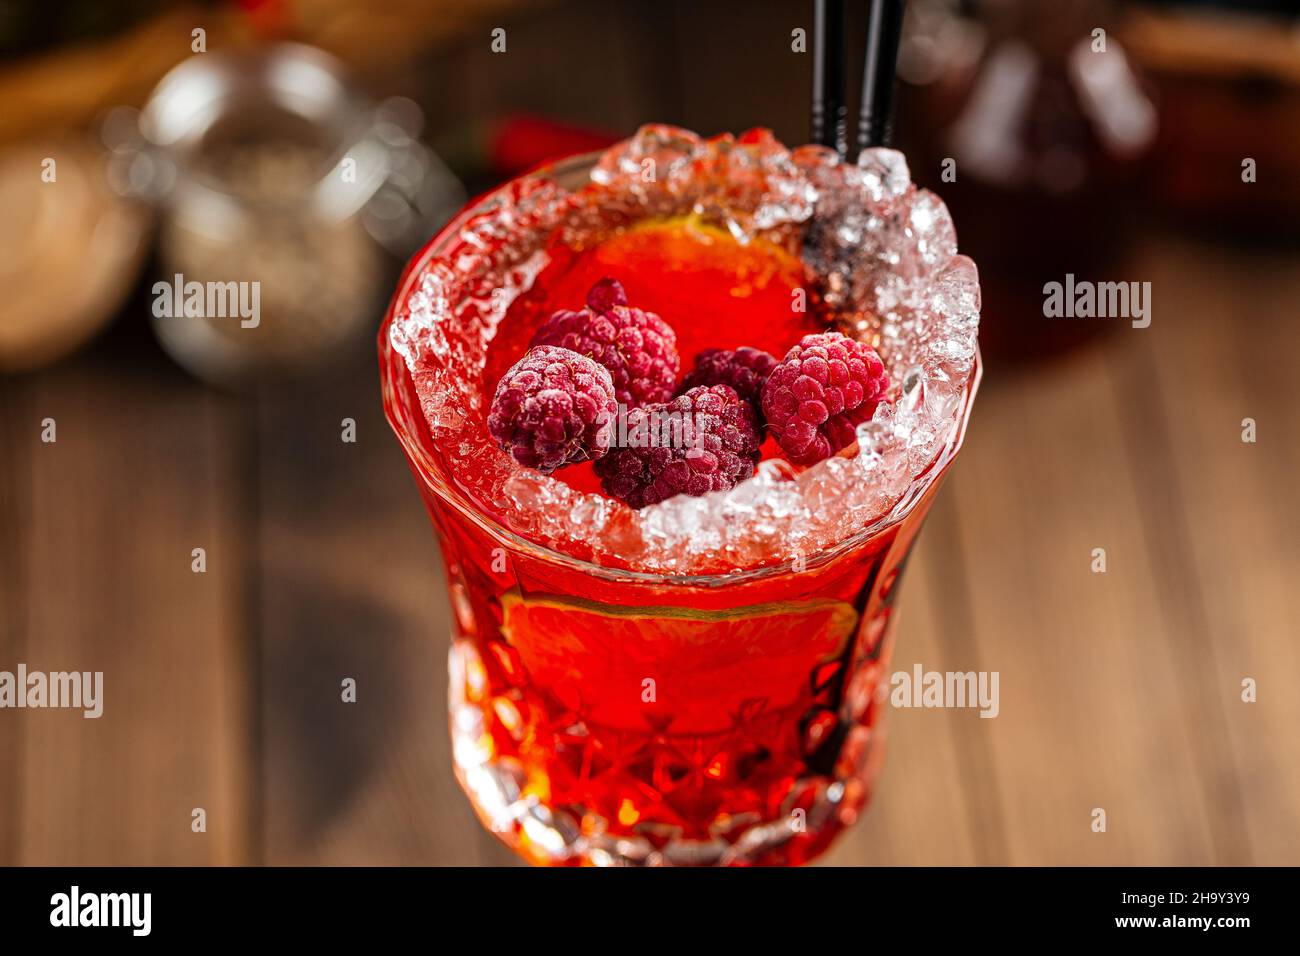 Sweet red berry alcohol cocktail in a fancy glass Stock Photo